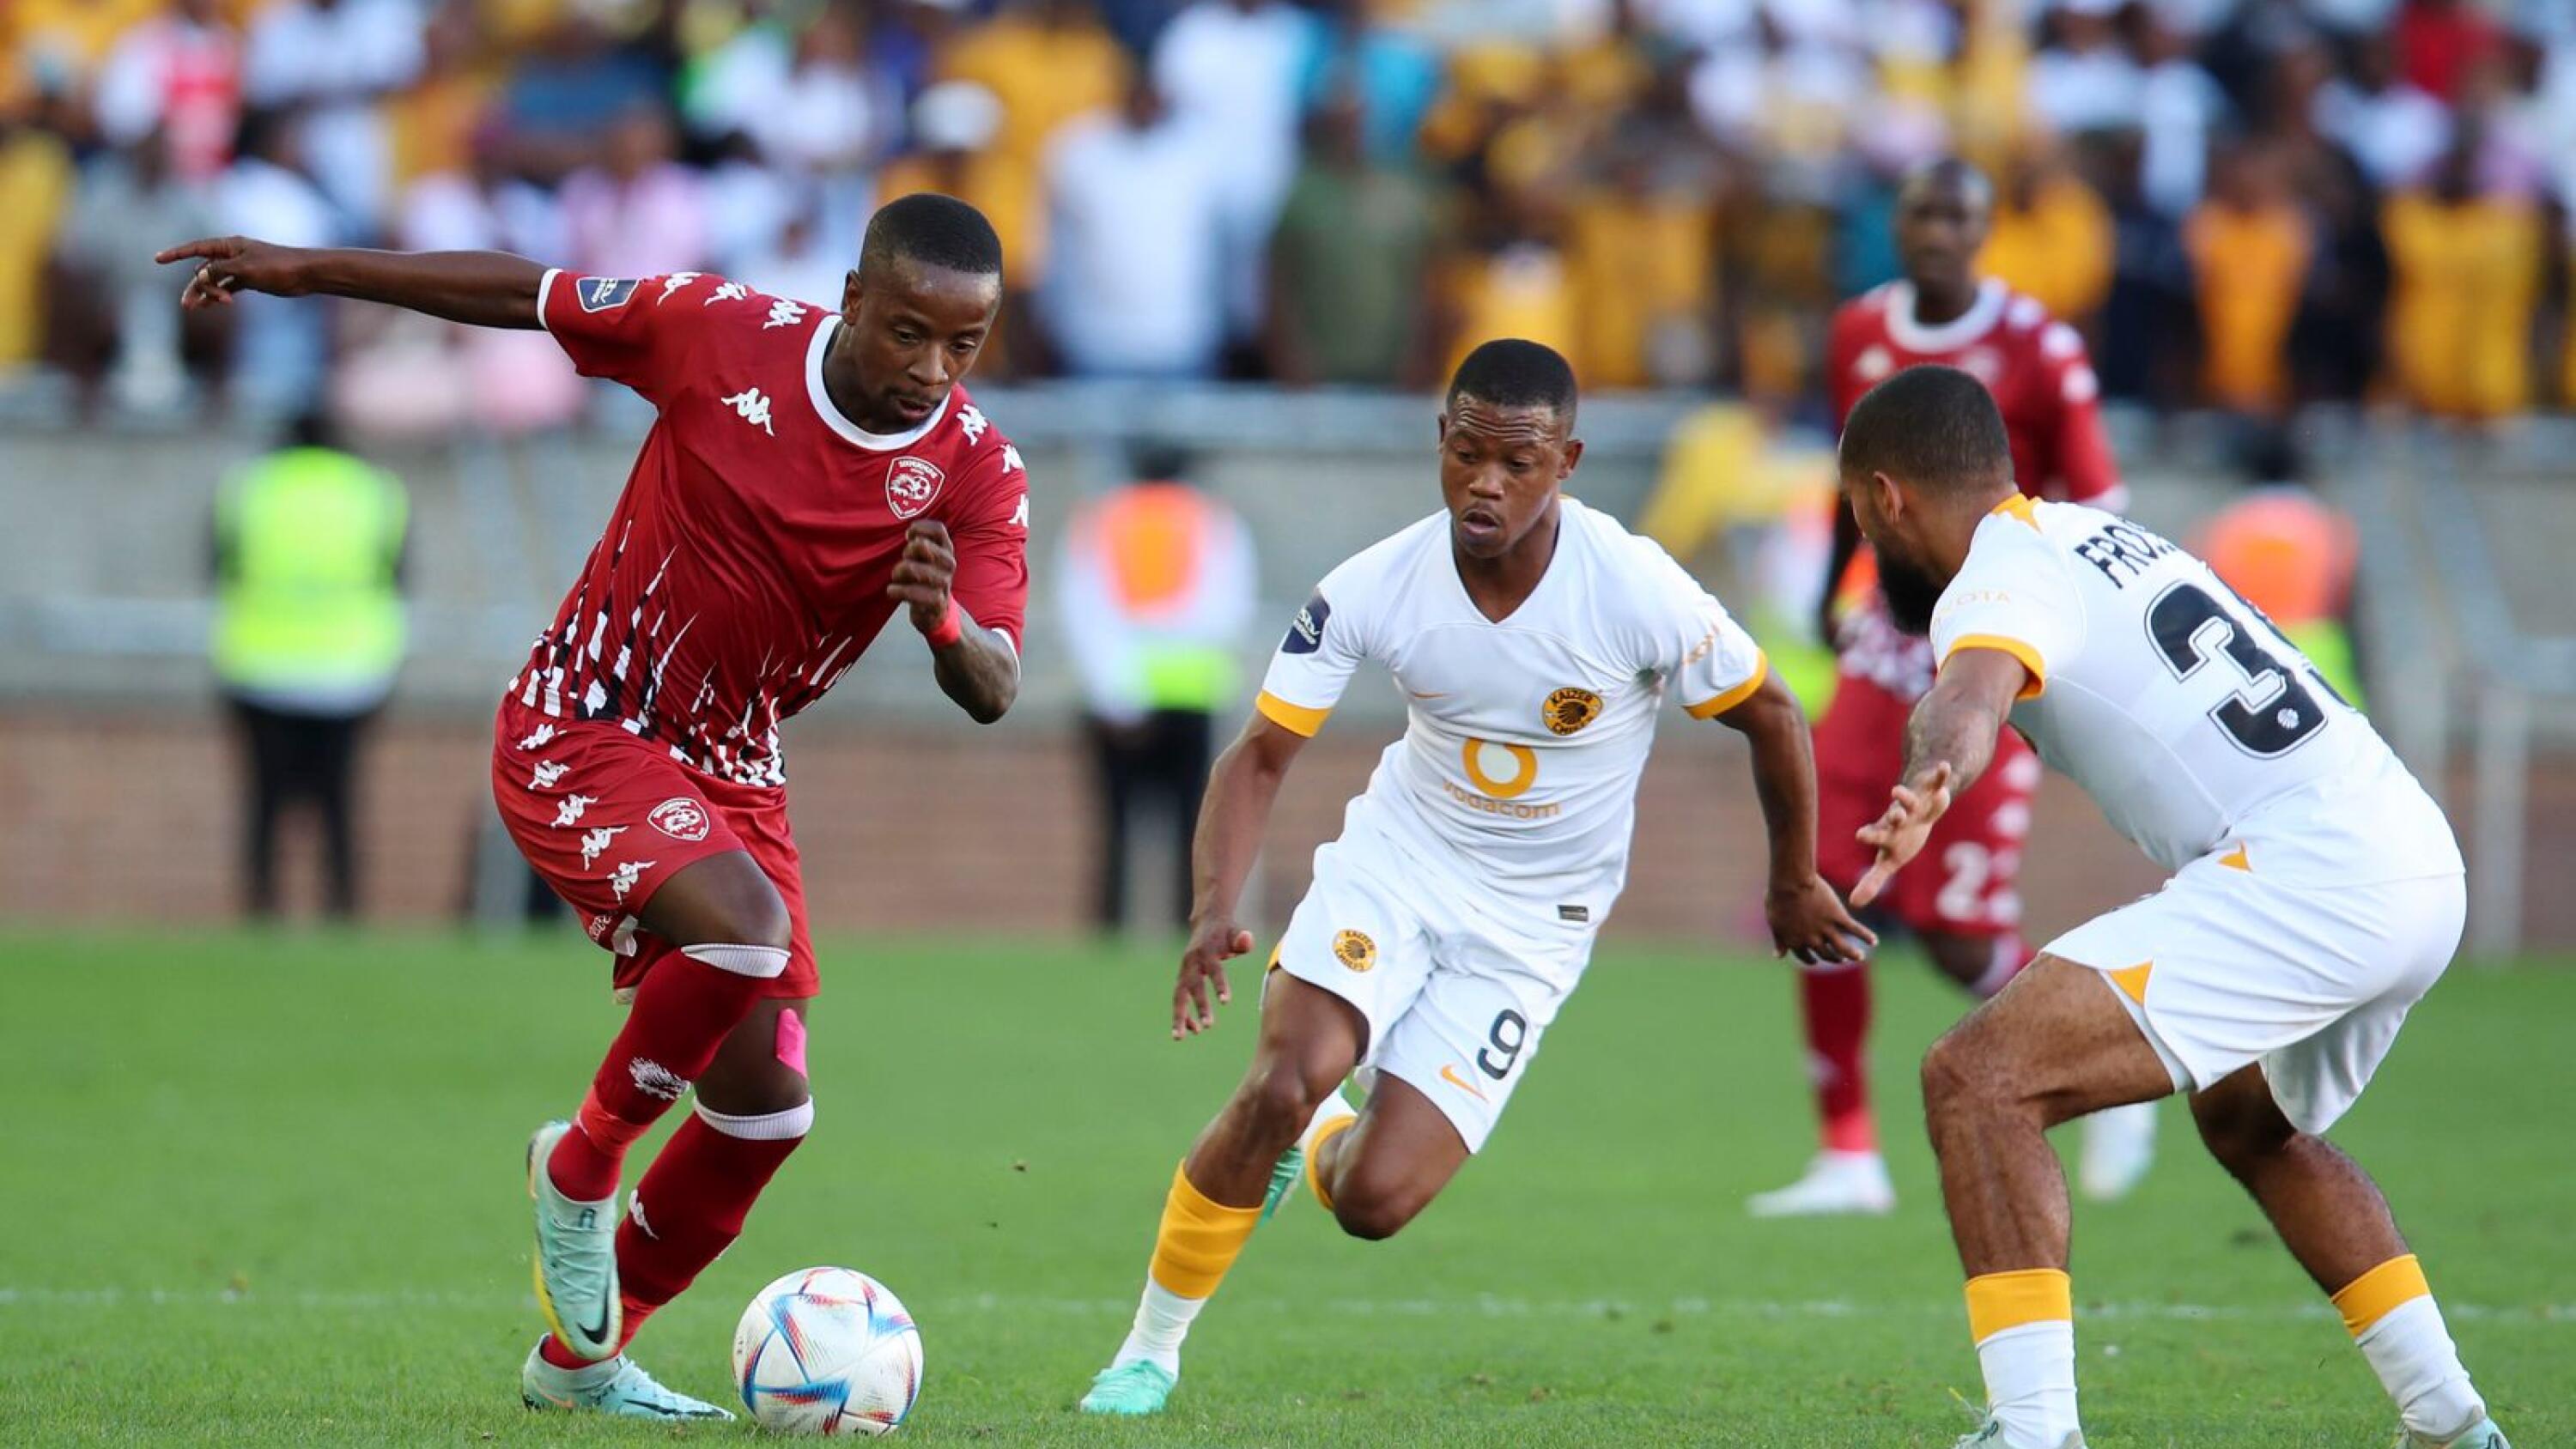 Vusimuzi Mncube of Sekhukhune United is challenged by Reeve Frosler and Ashley du Preez of Kaizer Chiefs during Sunday’s DStv Premiership match at the Peter Mokaba Stadium in Polokwane